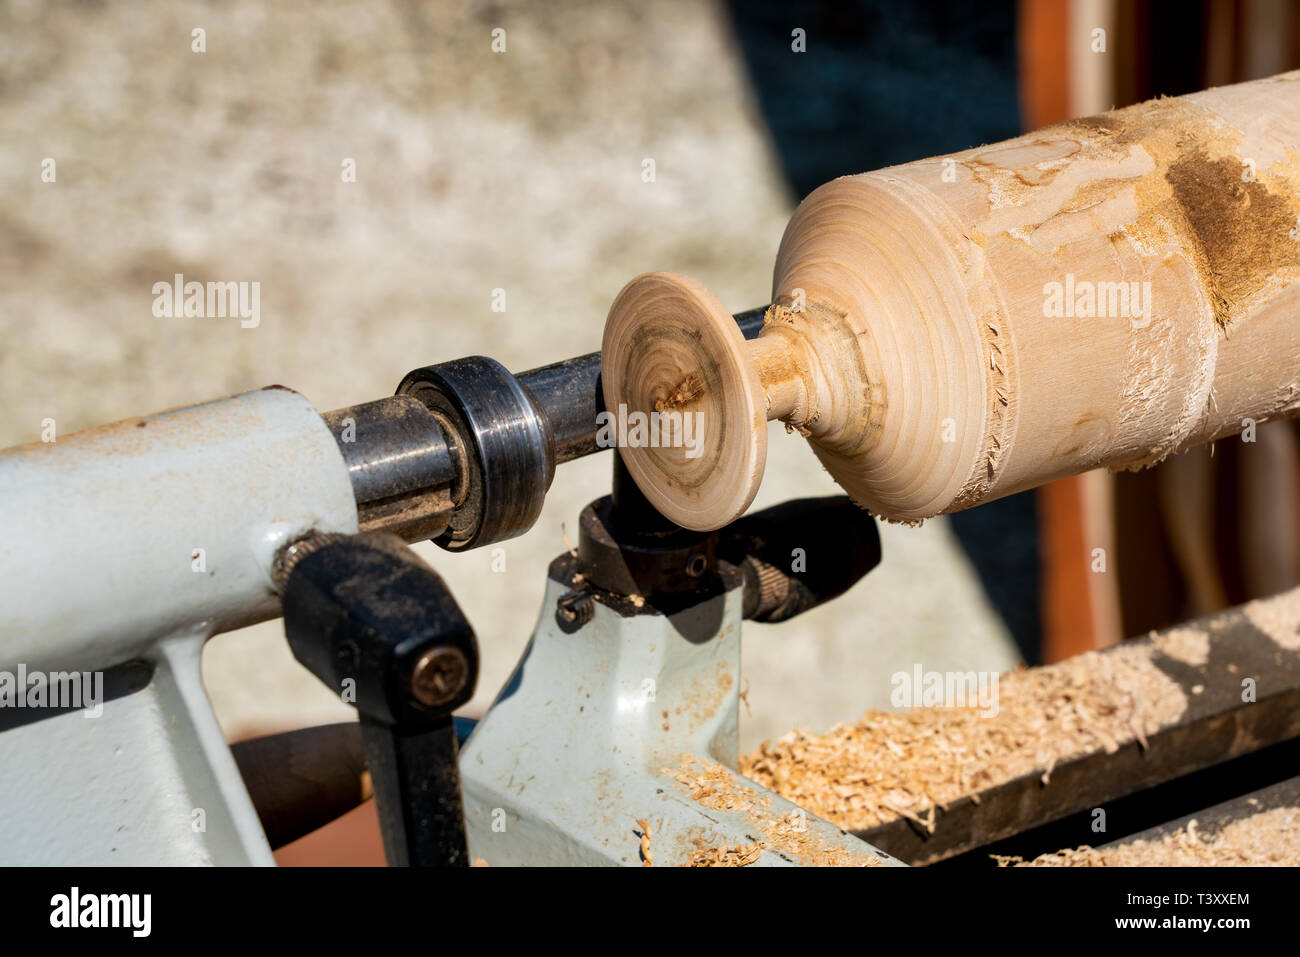 Woodworking Made Simple: Find A Wholesale torno para madera 